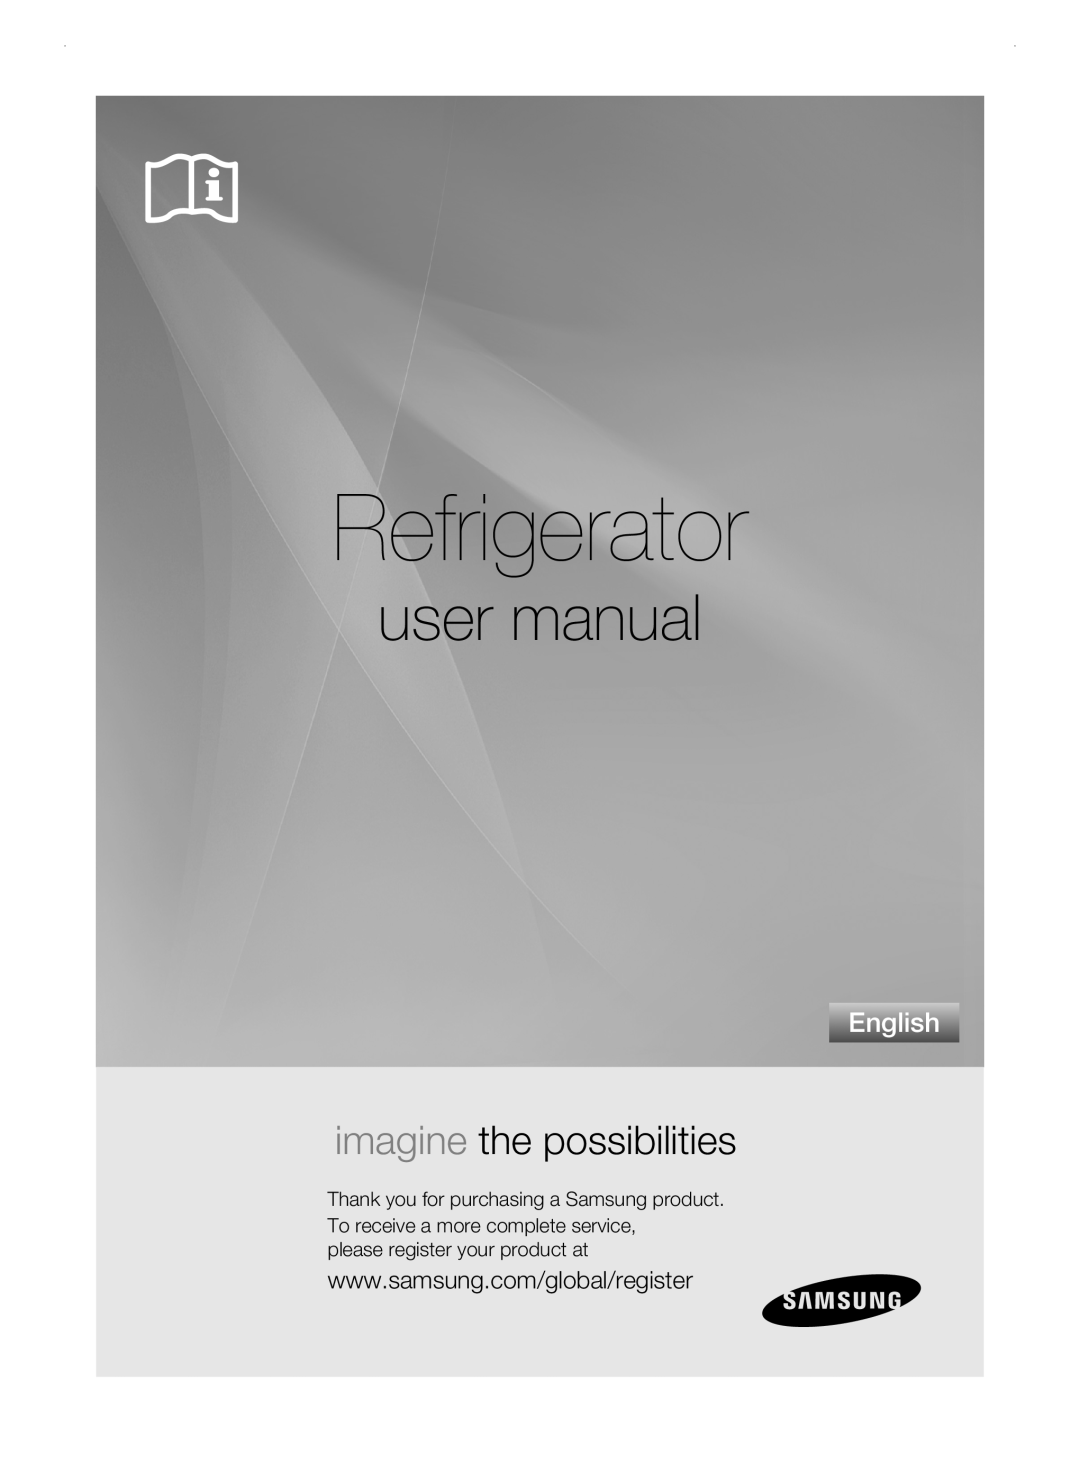 Samsung RSH3F user manual Thank you for purchasing a Samsung product, Refrigerator, imagine the possibilities, English 